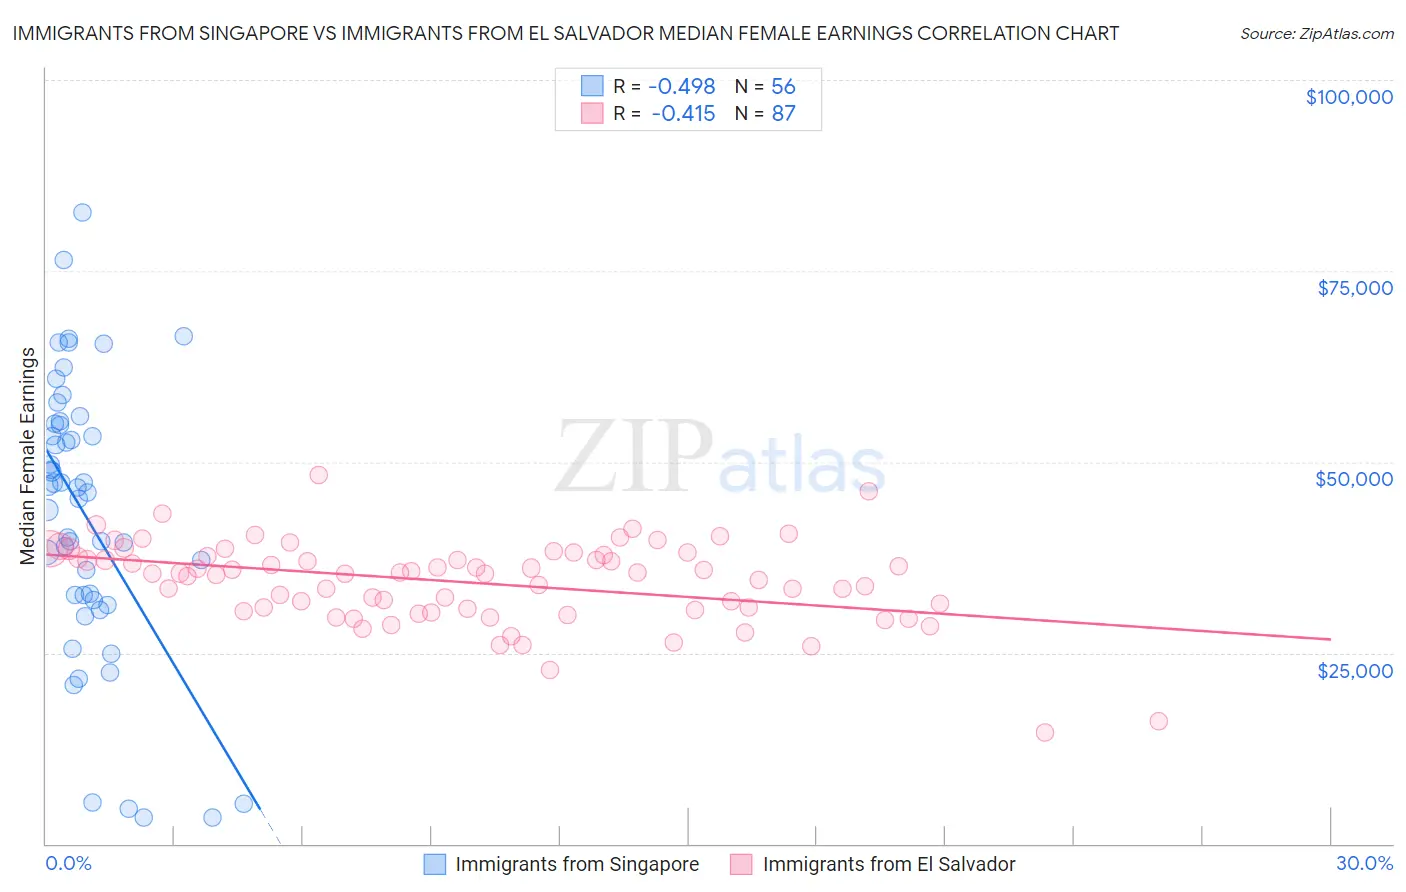 Immigrants from Singapore vs Immigrants from El Salvador Median Female Earnings